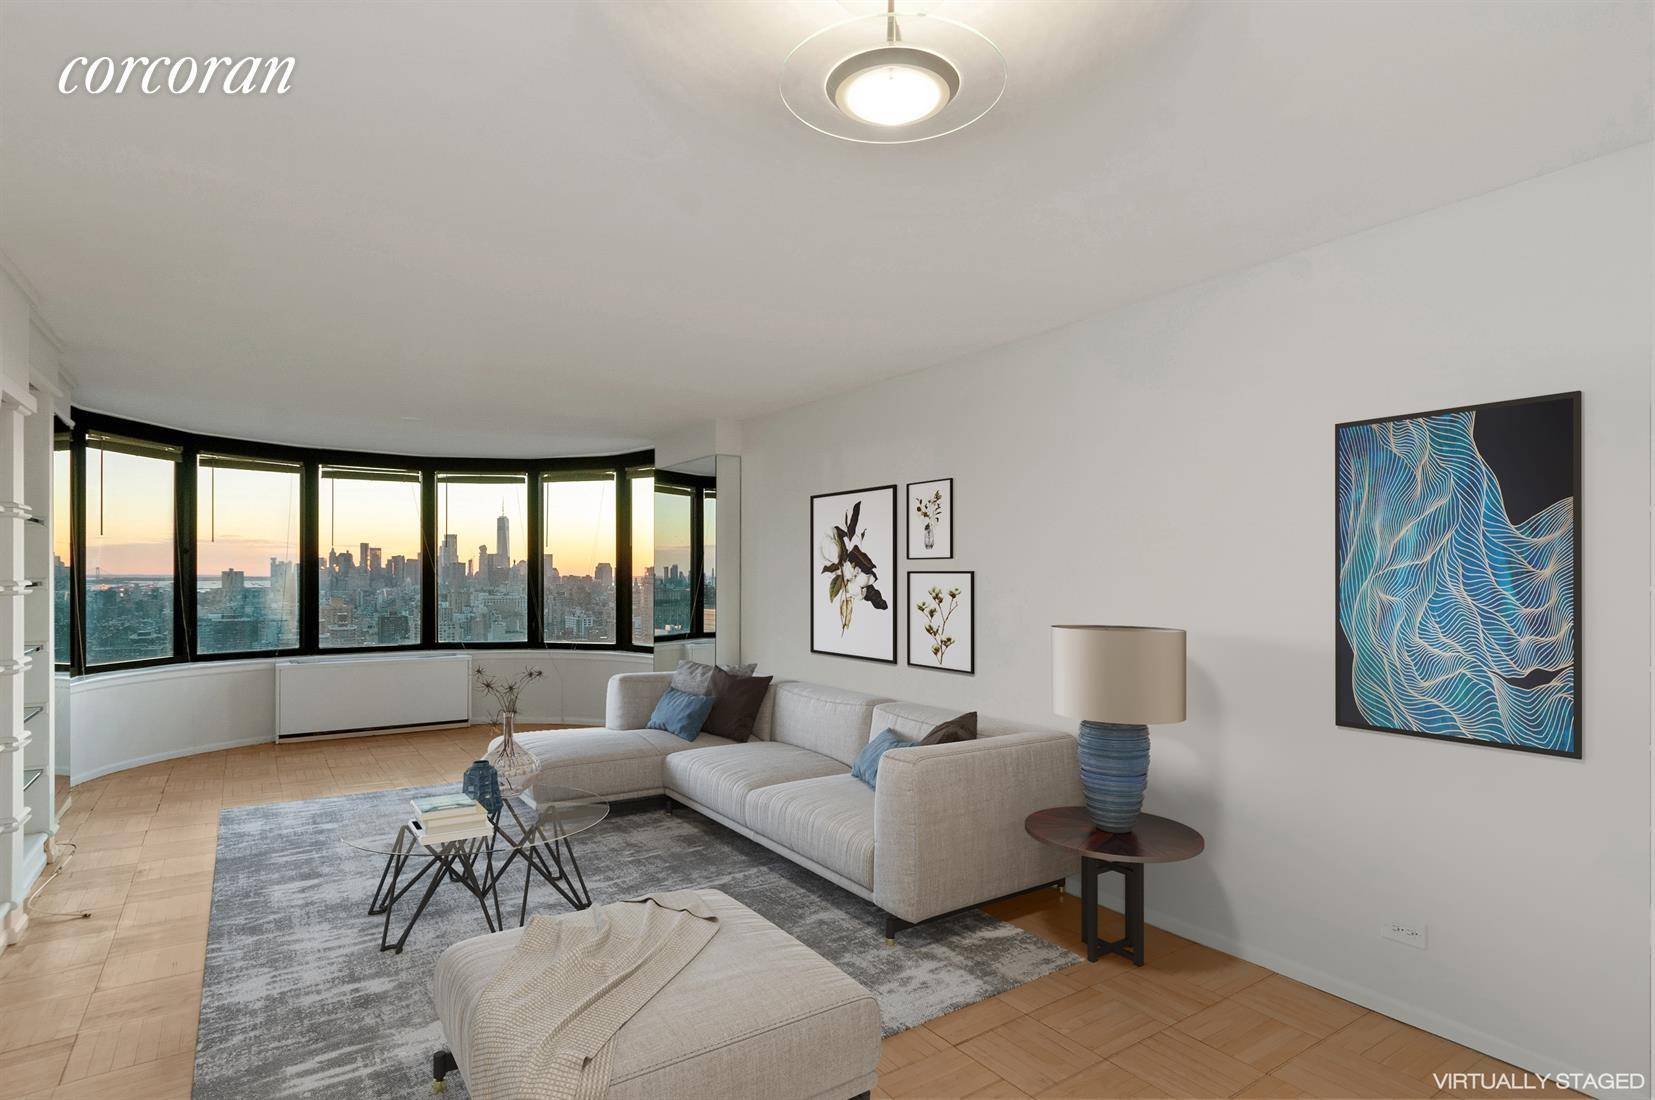 Corinthian Condo 330 East 38th Street Apt 47C New York, NY 10016 the most luxury building in Murray Hill, Spectacular panoramic view from 47th floor of South New York City ...